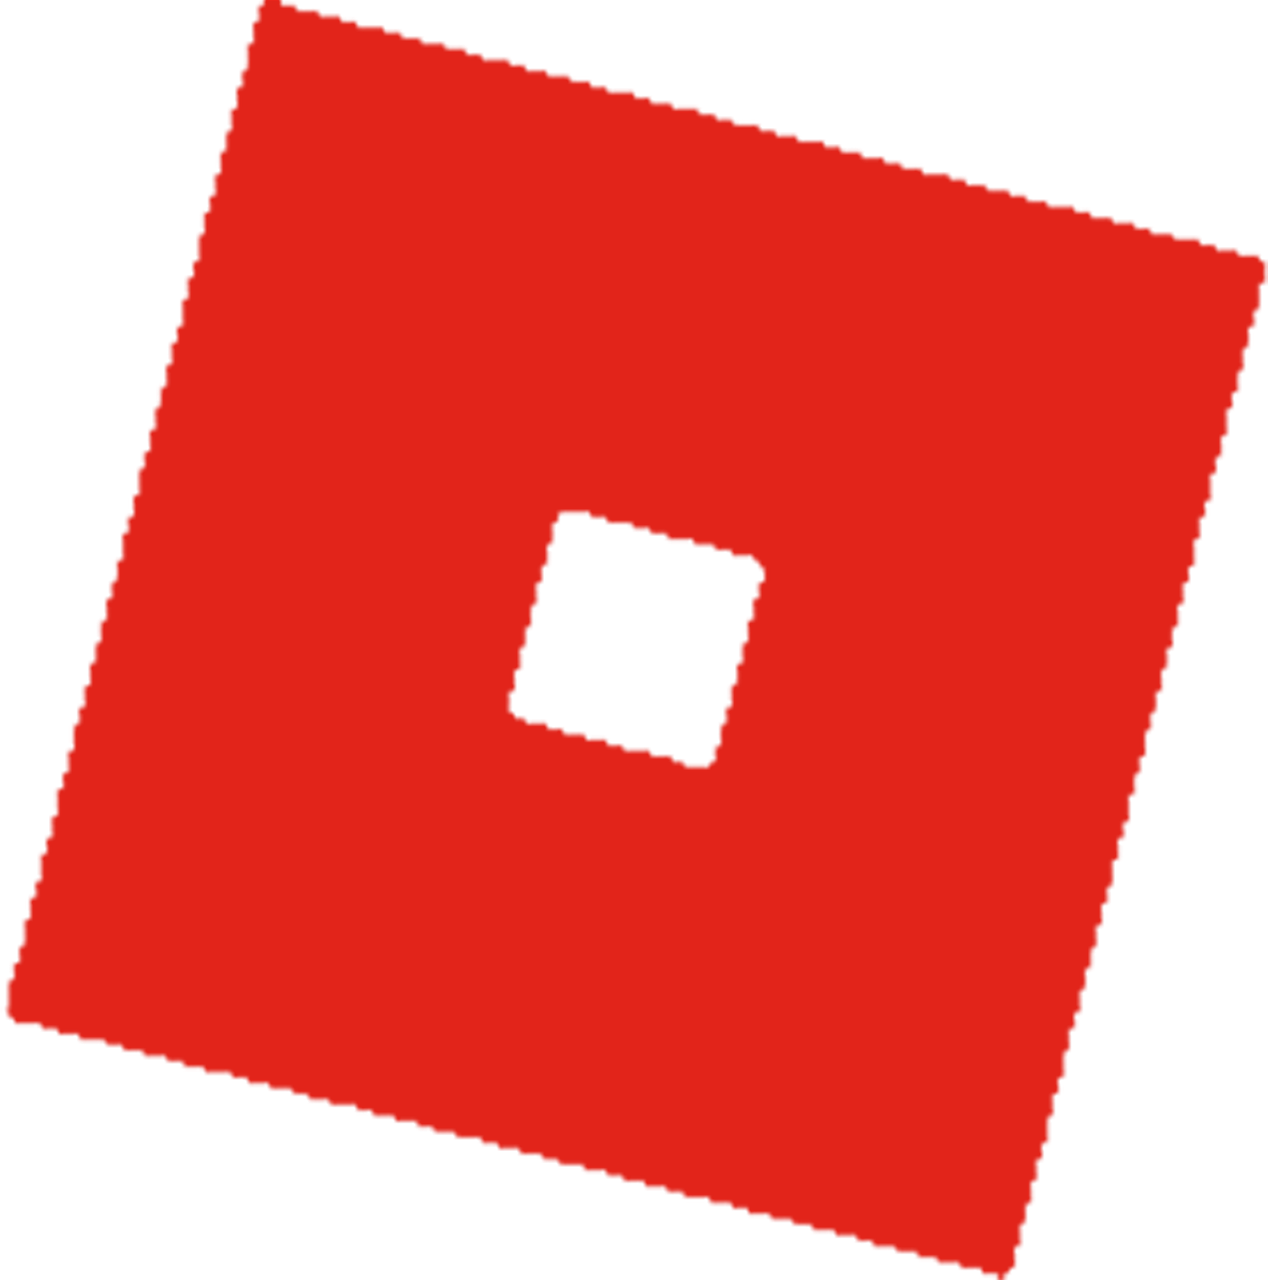 Download Free Roblox Logo Line Minecraft Red Free Clipart Hq Icon Favicon Freepngimg - download for free 10 png roblox icon admin top images at